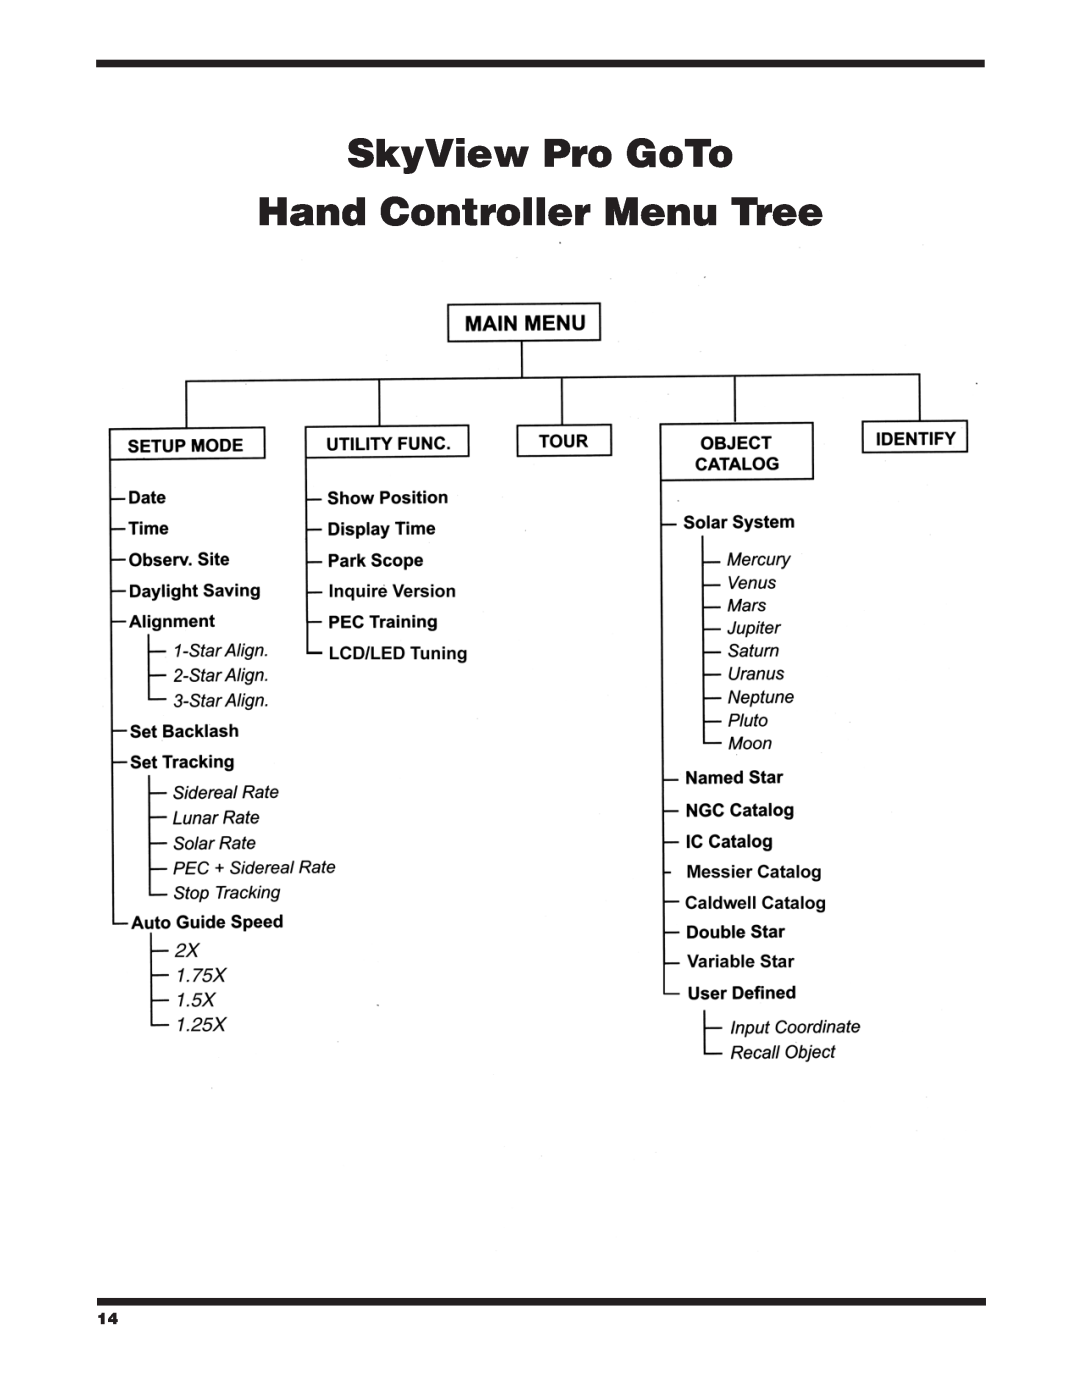 Orion 7817 instruction manual SkyView Pro GoTo Hand Controller Menu Tree 